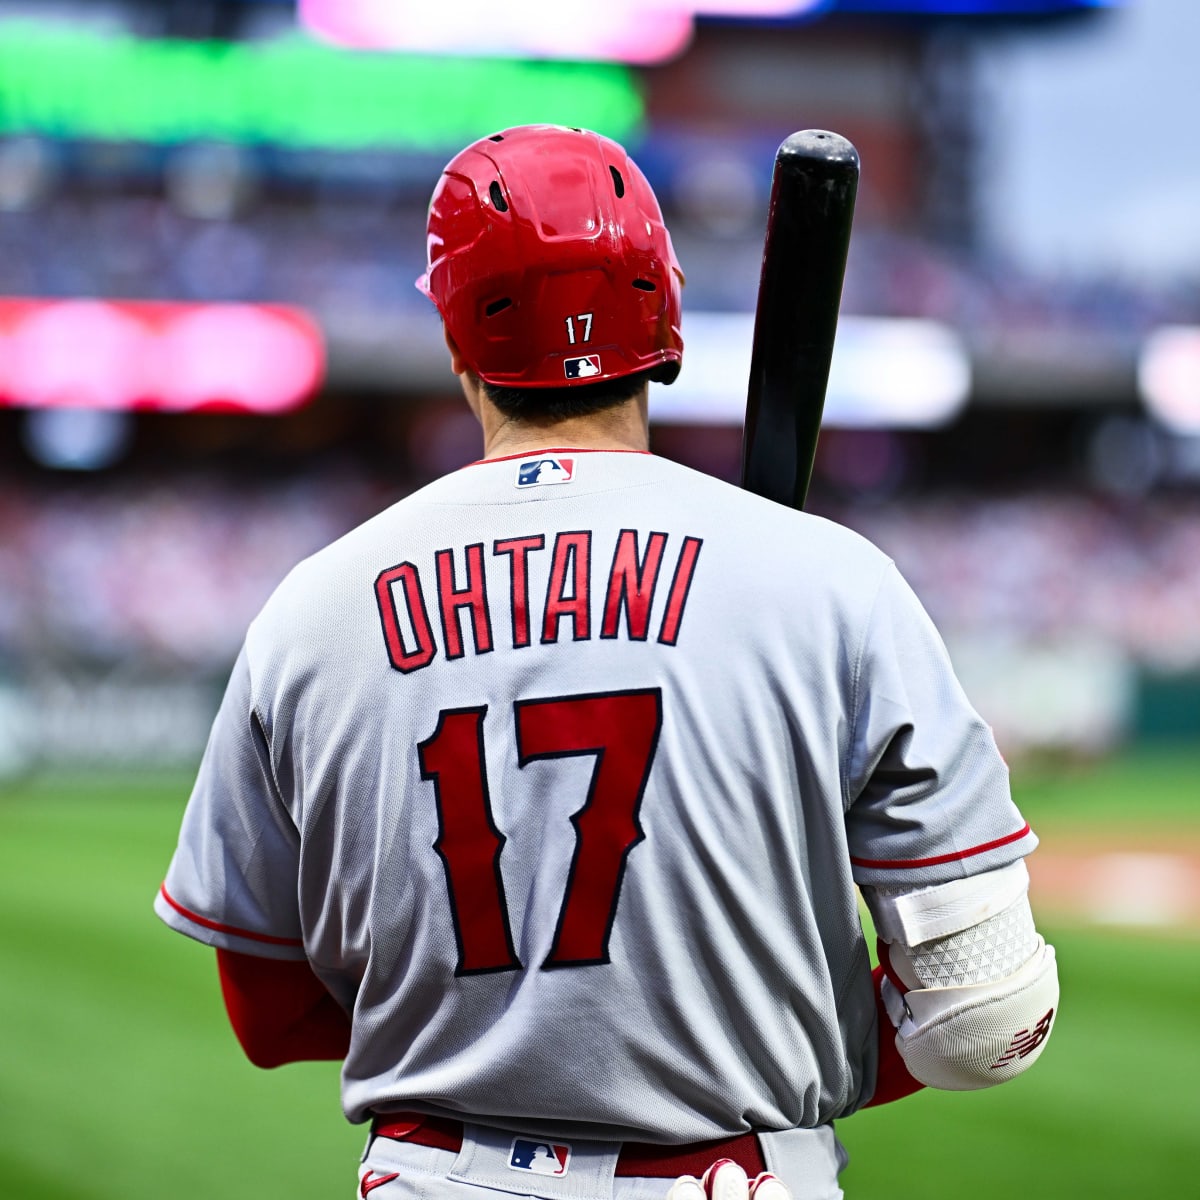 Angels News: Shohei Ohtani's Latest Accomplishment a First in his